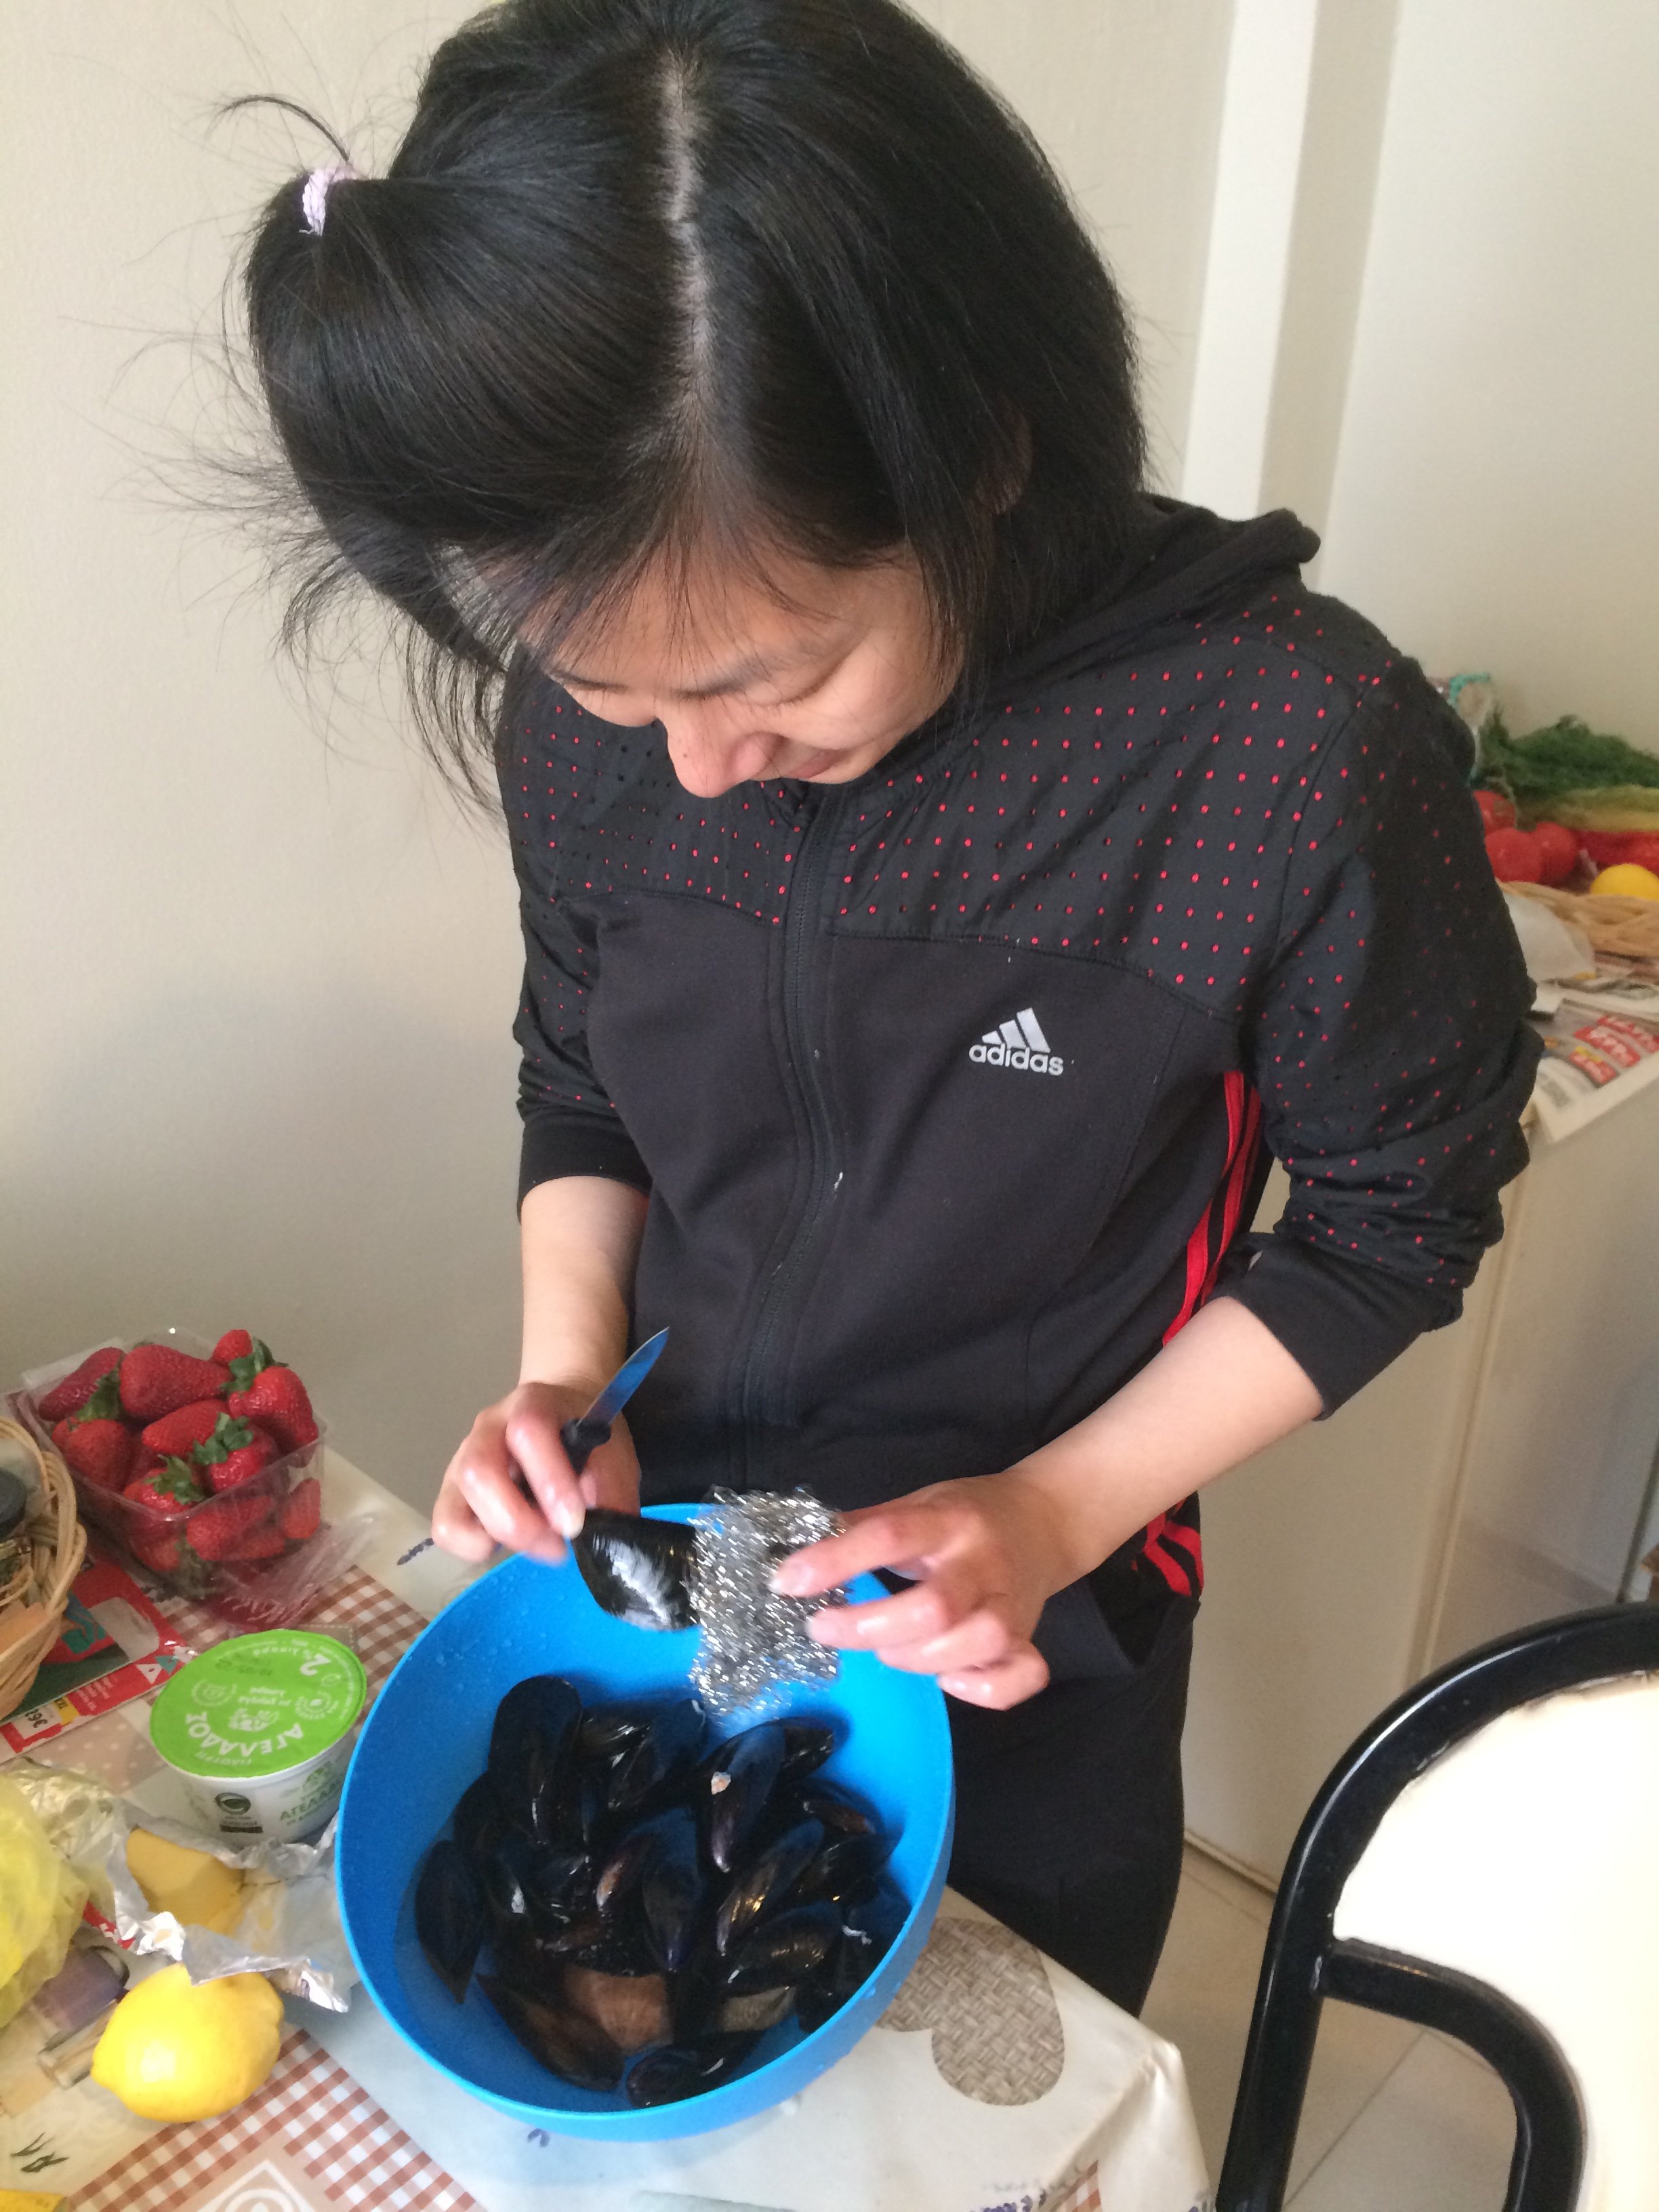 My new friend from Japan at my flat cooking together.